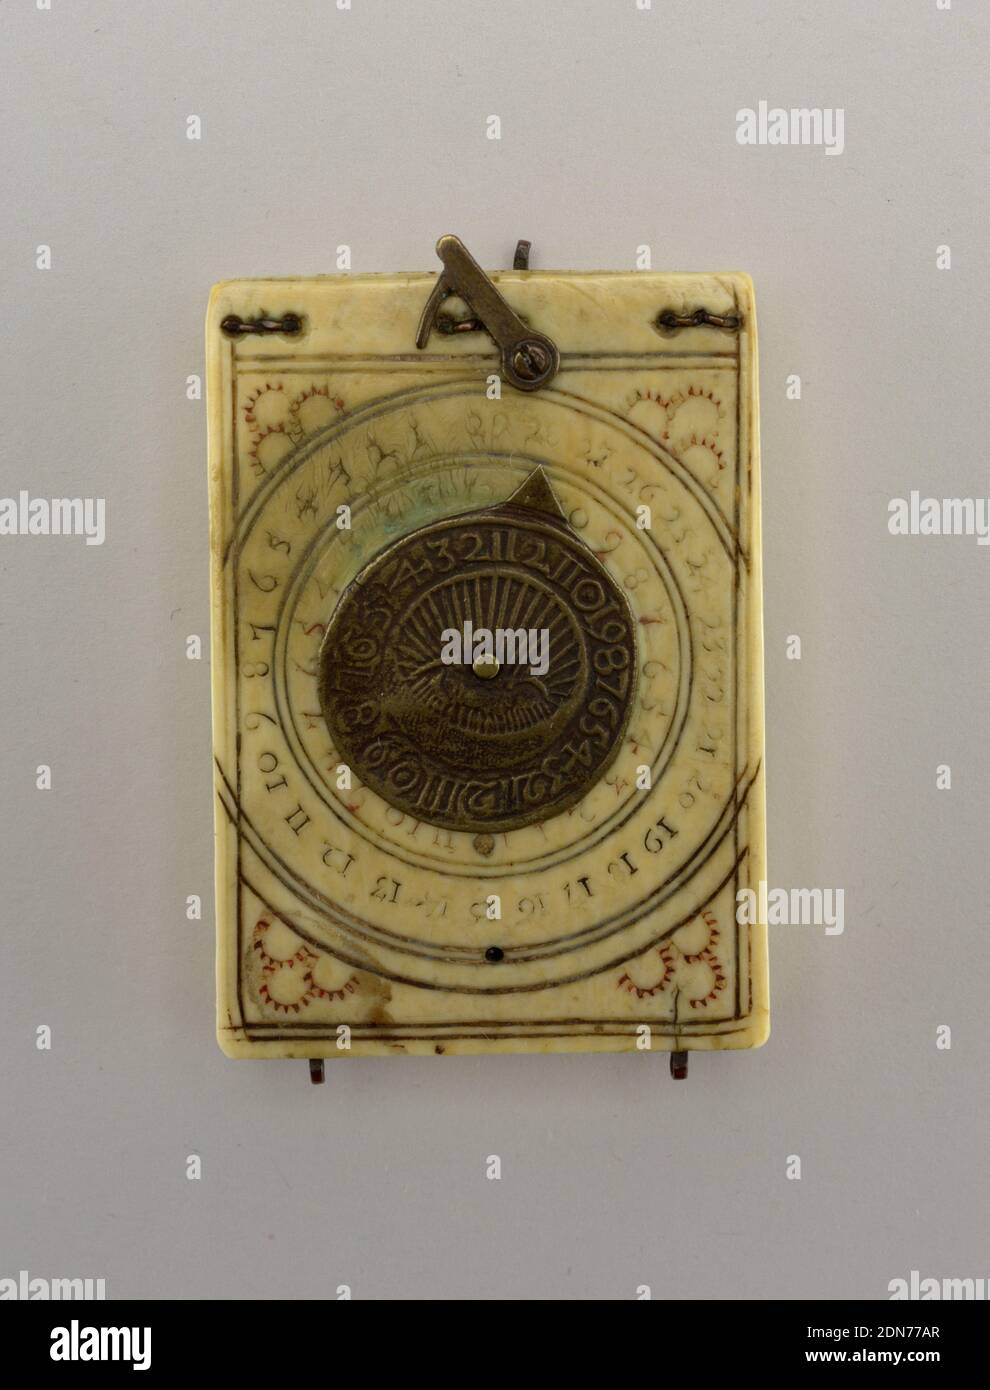 Sundial compass, Bone, brass, Germany, late 17th–early 18th